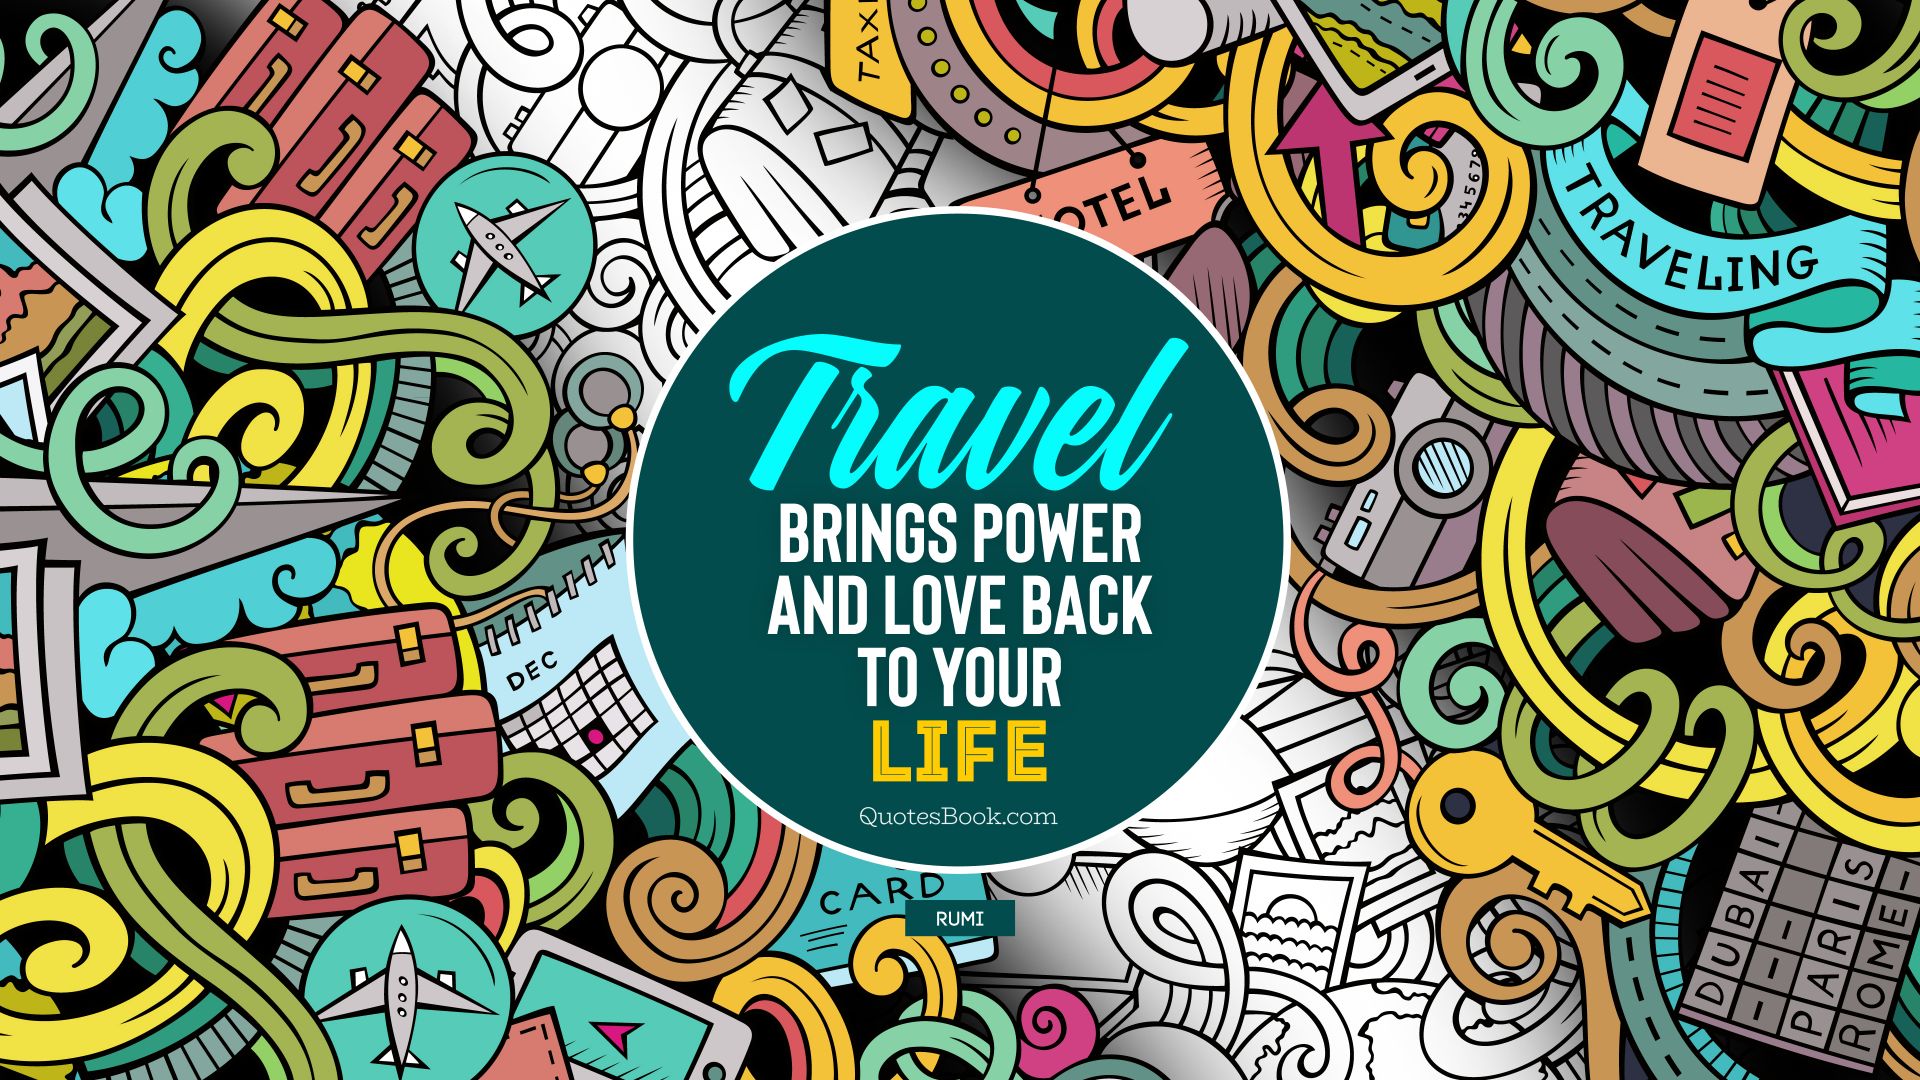 Travel brings power and love back to your life. - Quote by Rumi